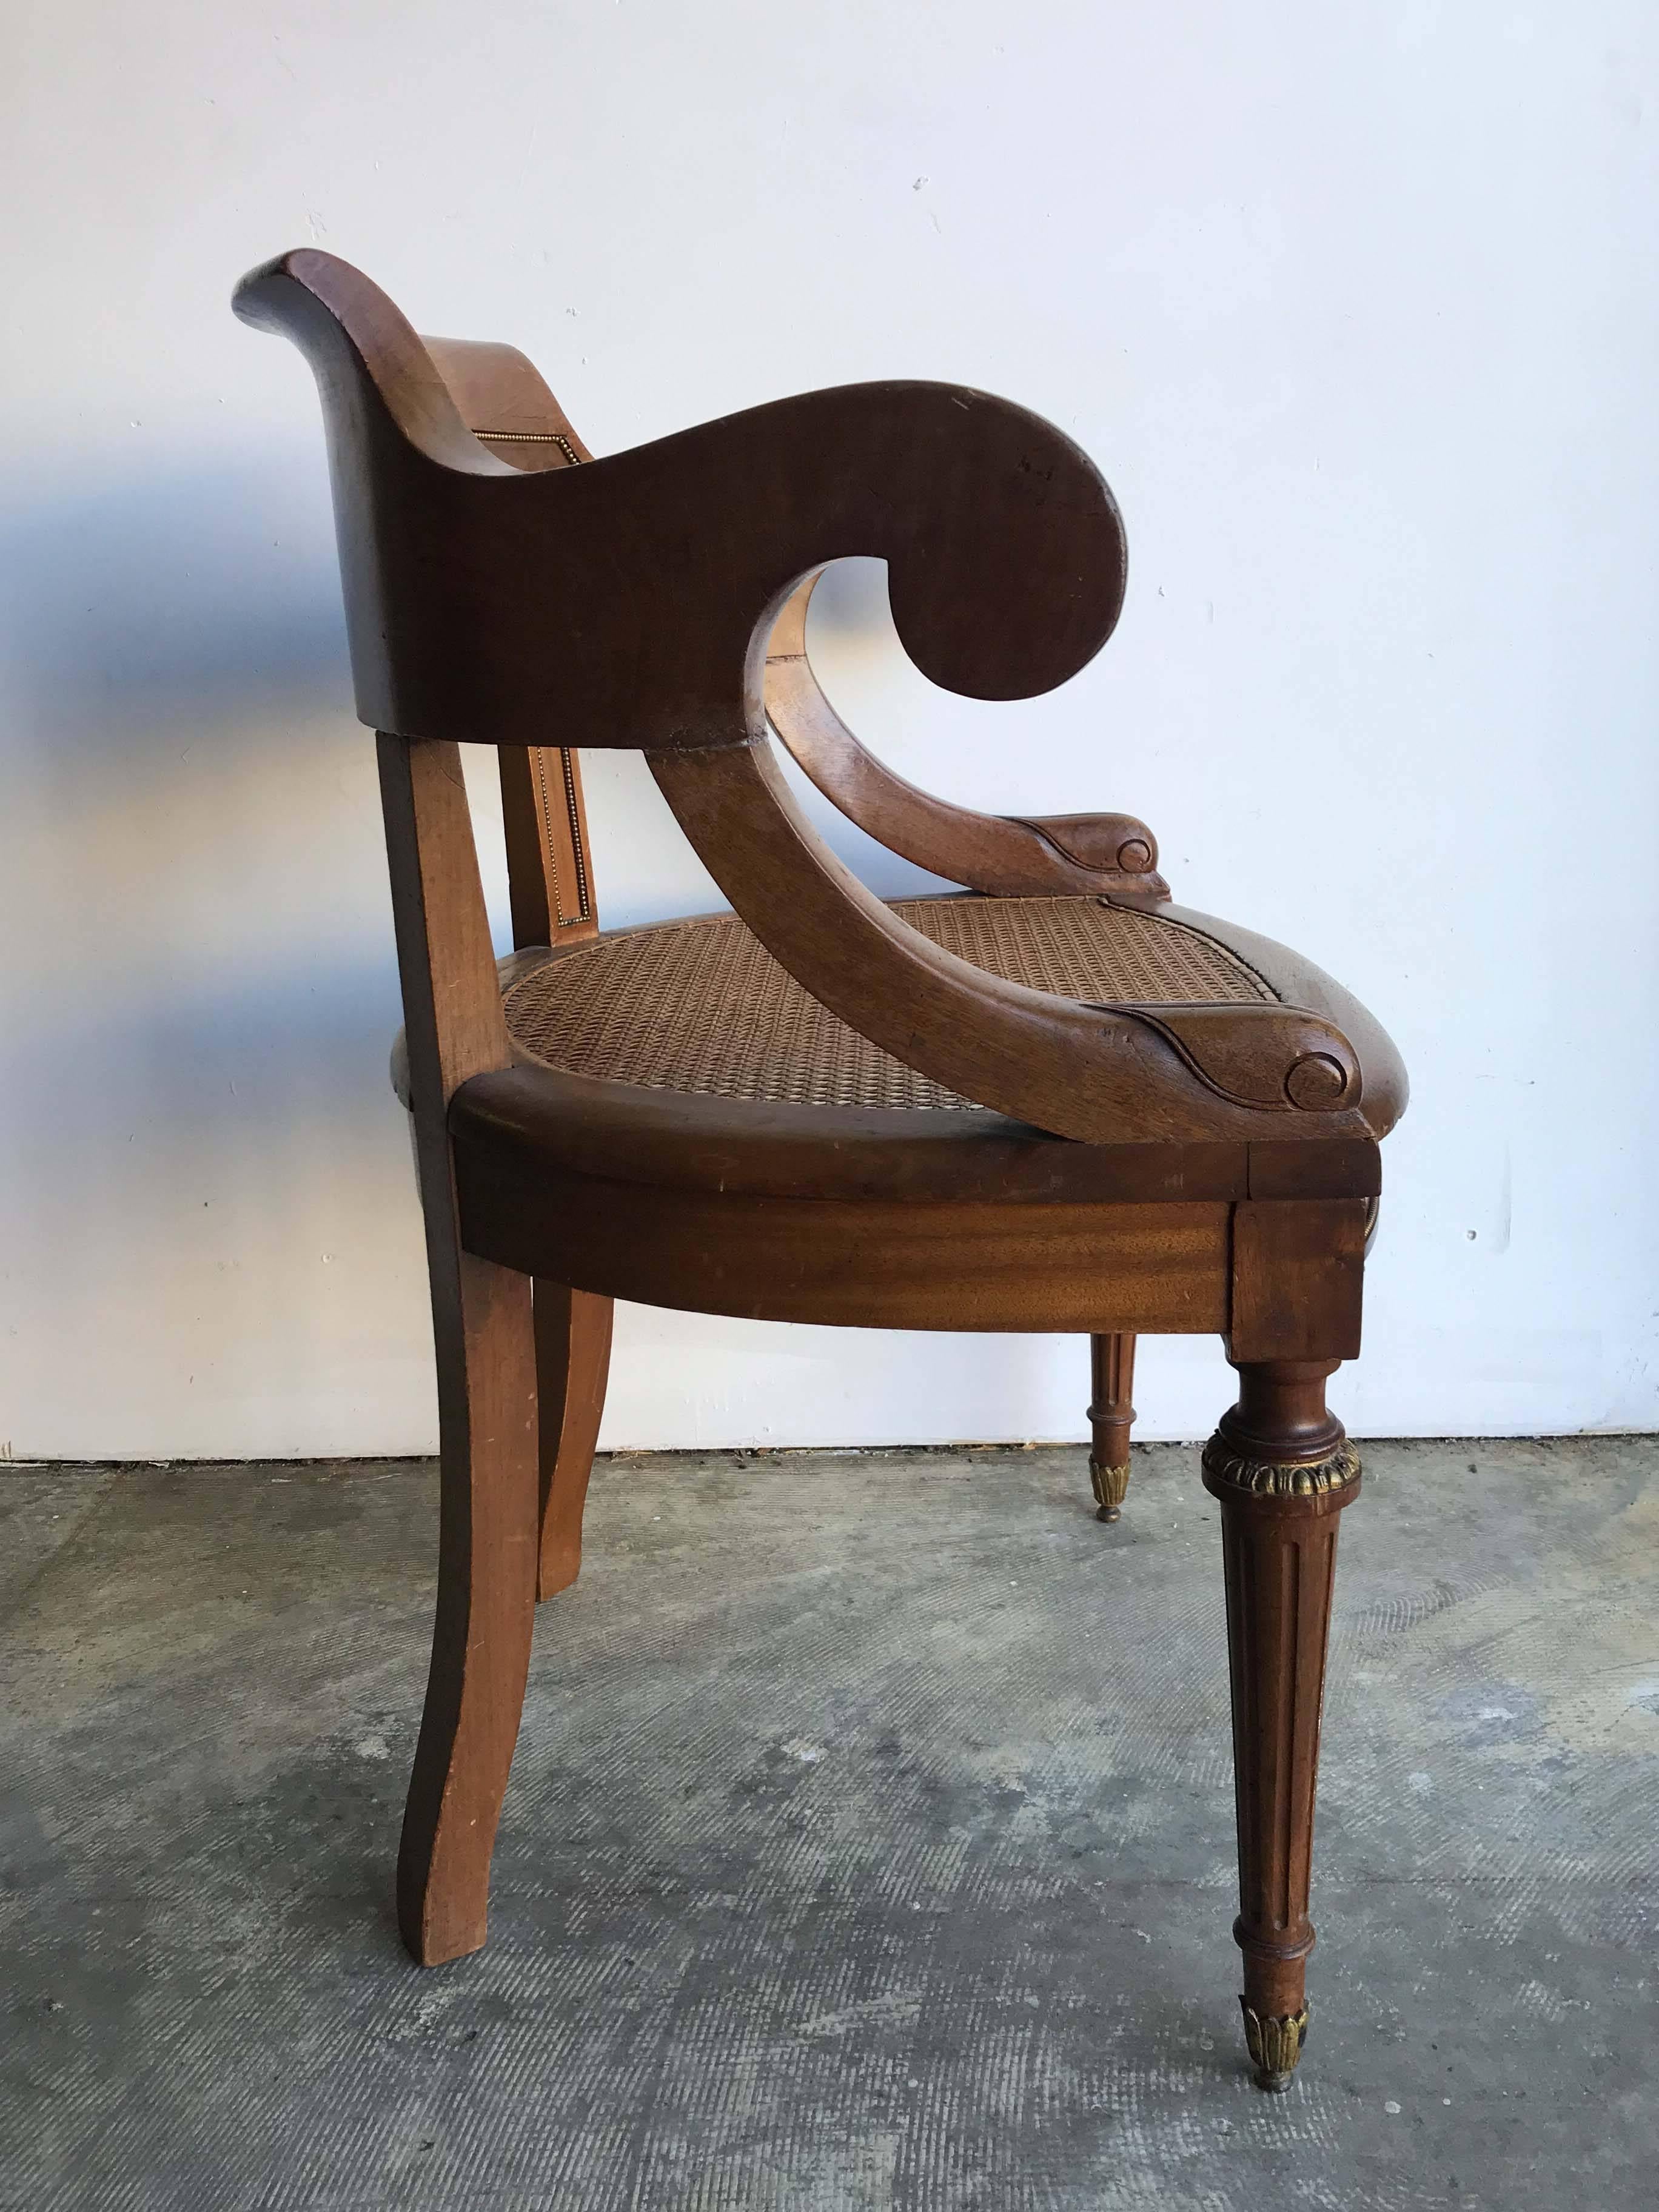 Antique French mahogany armchair with curved back and brass-trimmed recessed panel. Caning on seat in excellent condition.